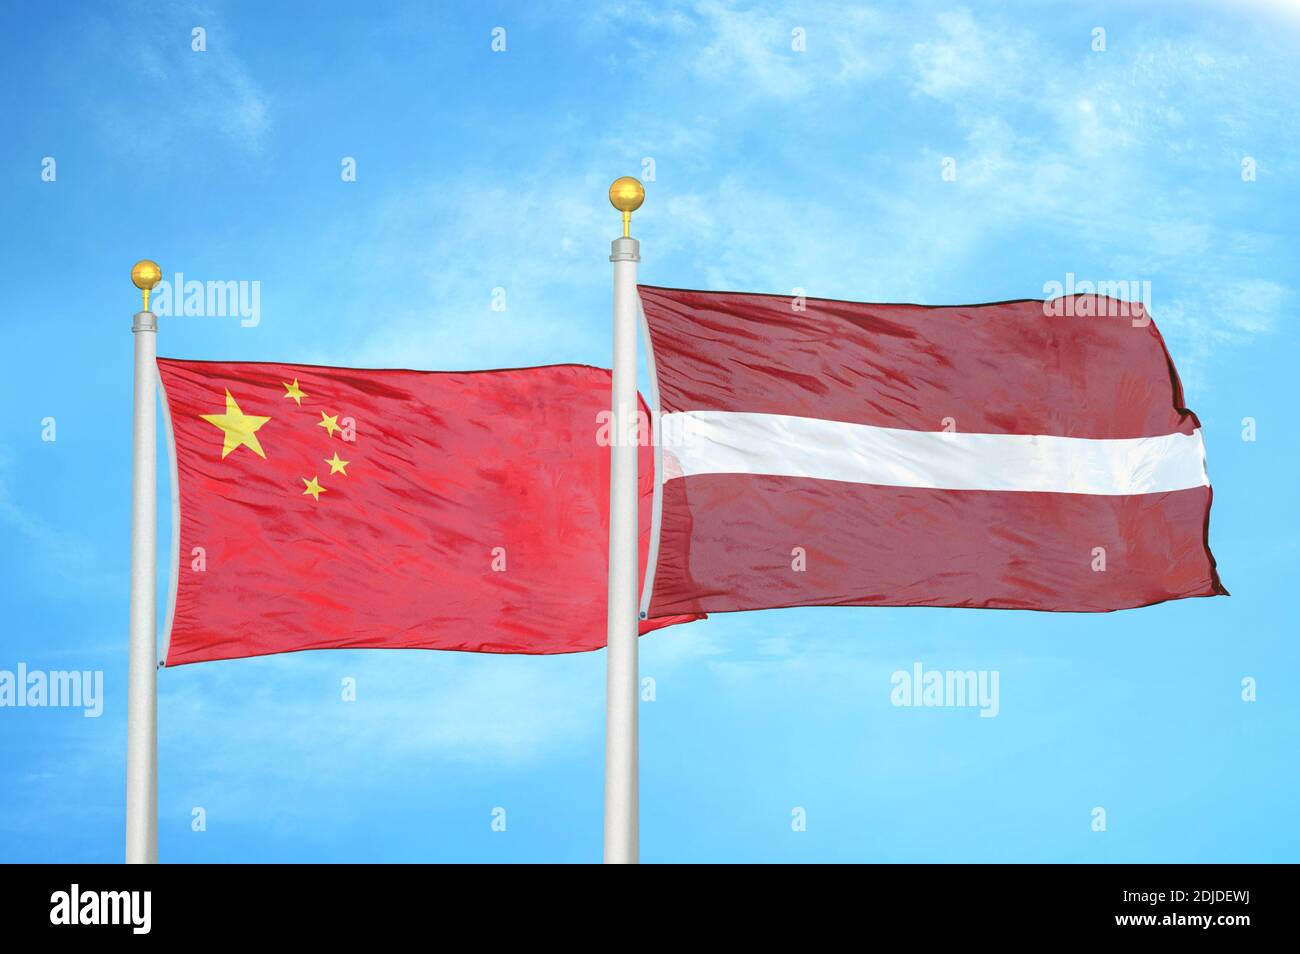 China and Latvia two flags on flagpoles and blue cloudy sky Stock Photo